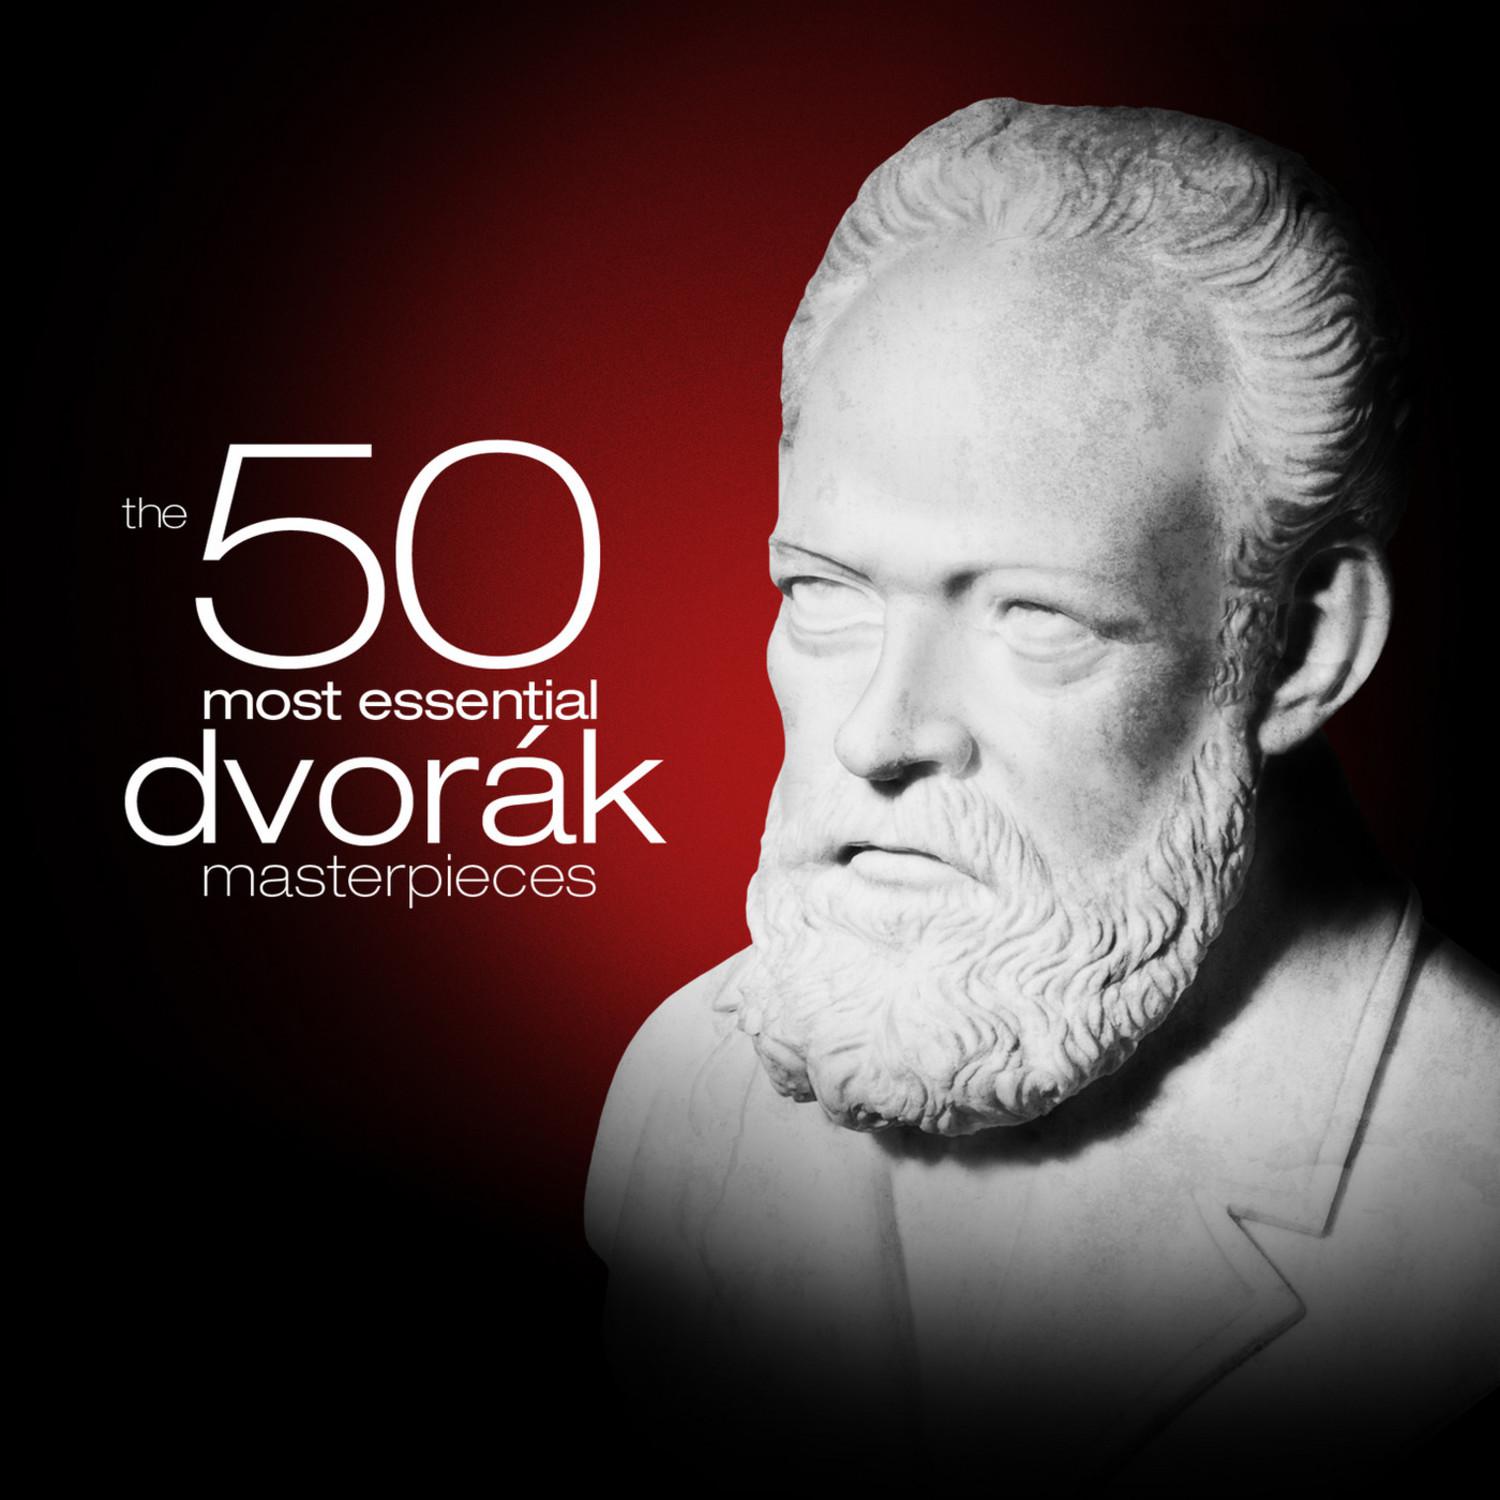 The 50 Most Essential Dvoa k Masterpieces